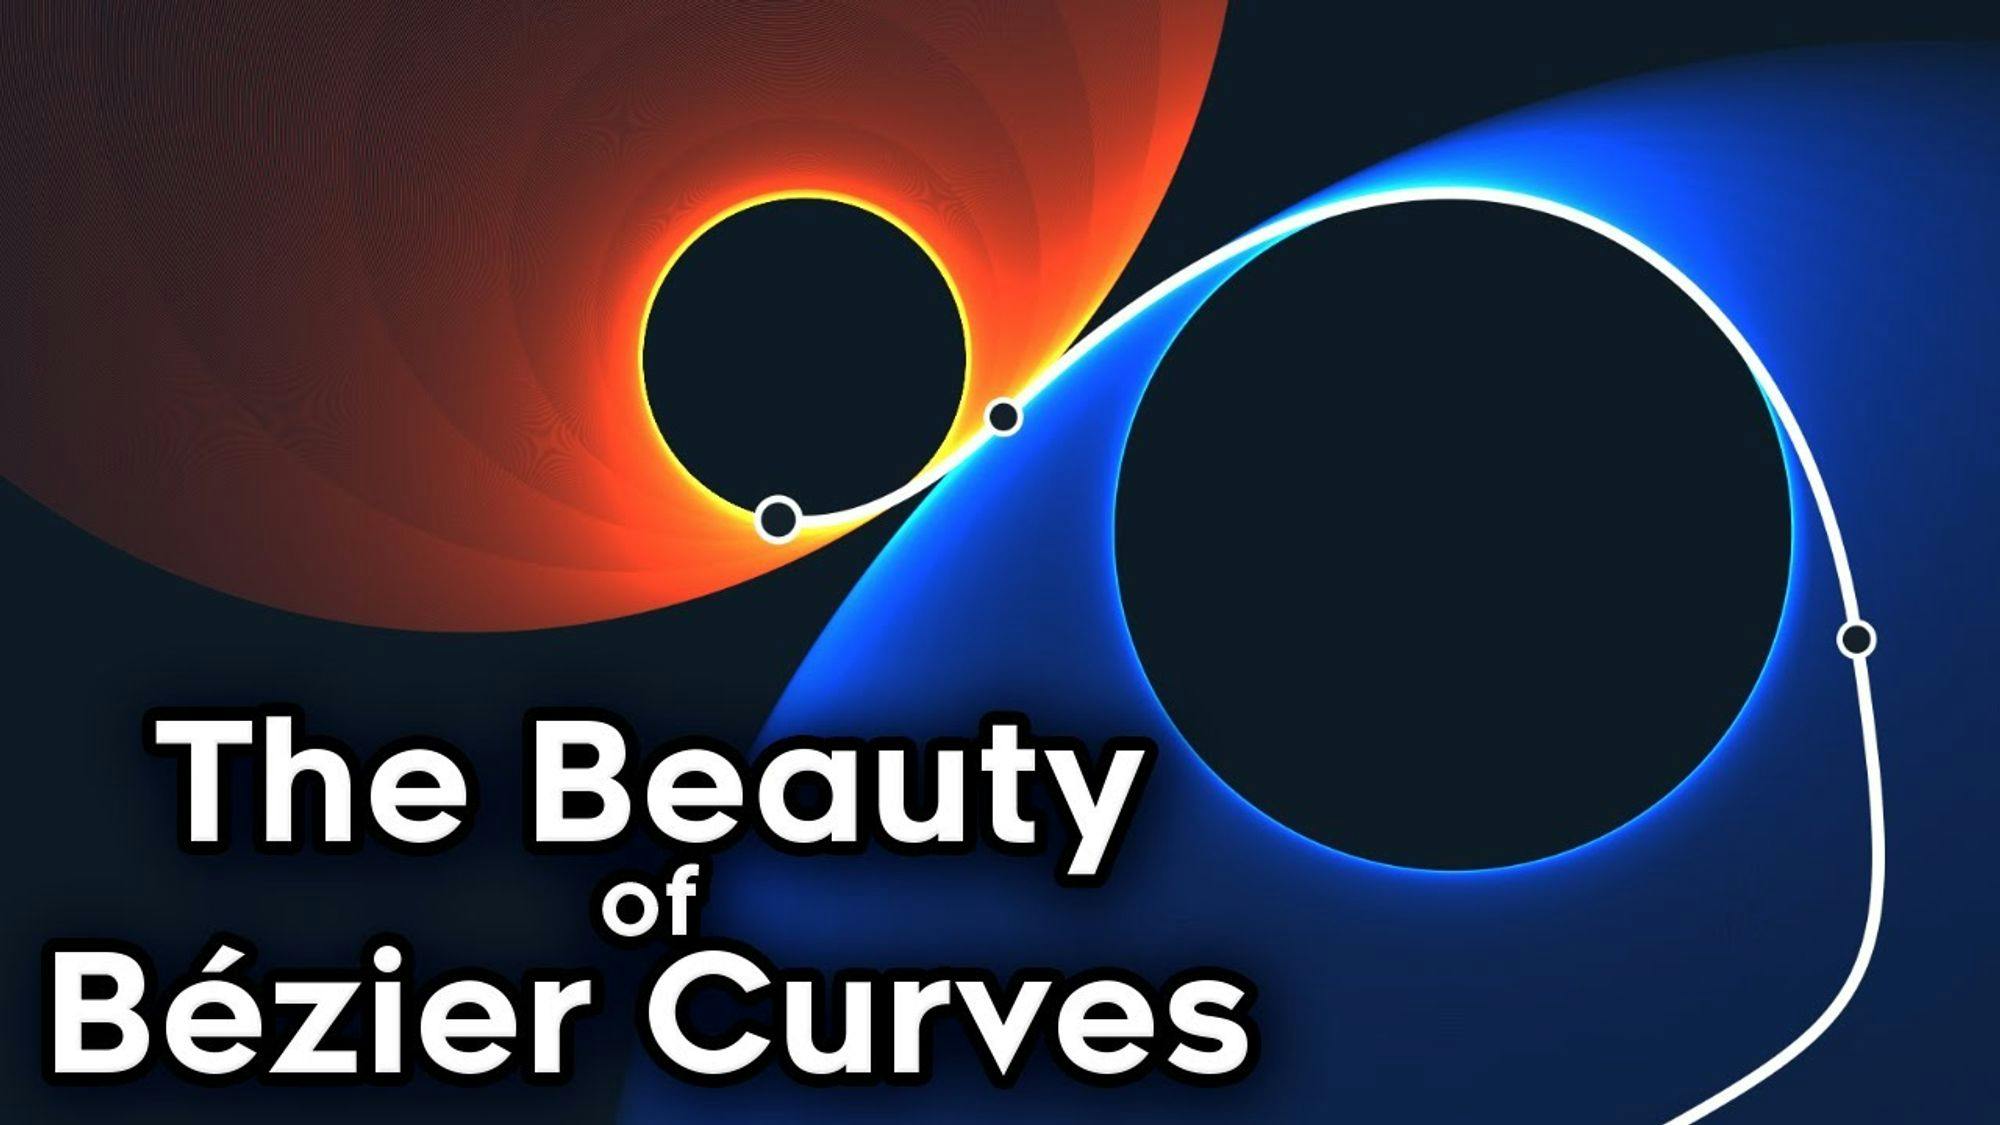 The Beauty of Bézier Curves